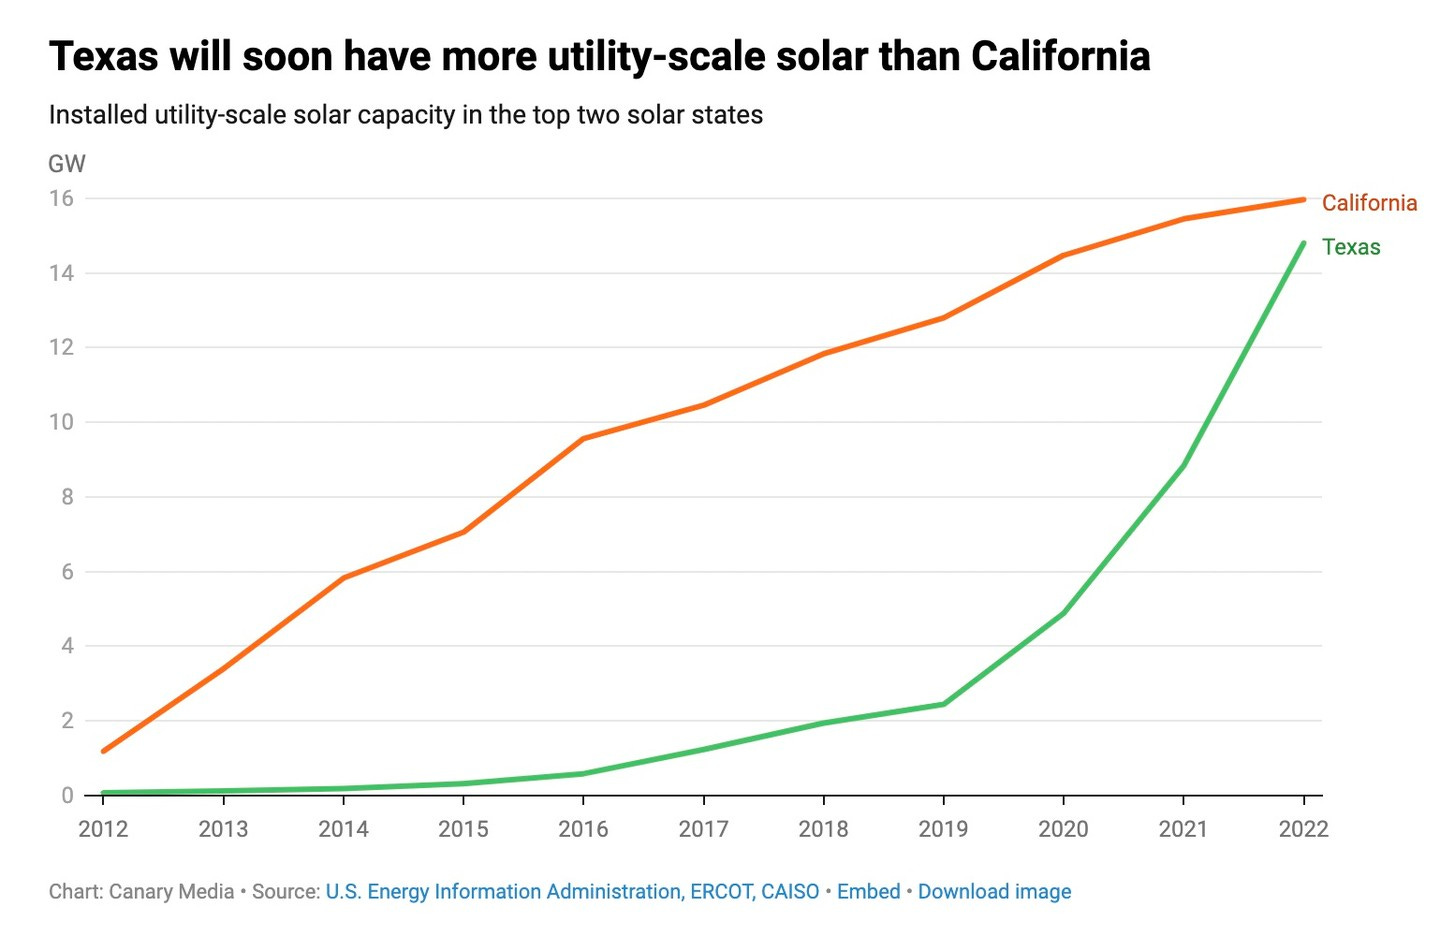 Photo by Alec Stapp on September 27, 2023. May be an image of text that says 'GW 16 Texas will soon have more utility-scale solar than California Installed utility-scale solar capacity in the top two solar states 14 12 10 California Texas 8 6 2 2012 2013 2014 2015 2016 2017 2018 Chart: Canary Media Source: U.S. Energy Information Administration, ERCOT, CAISO Embed Download image 2019 2020 2021 2022'.